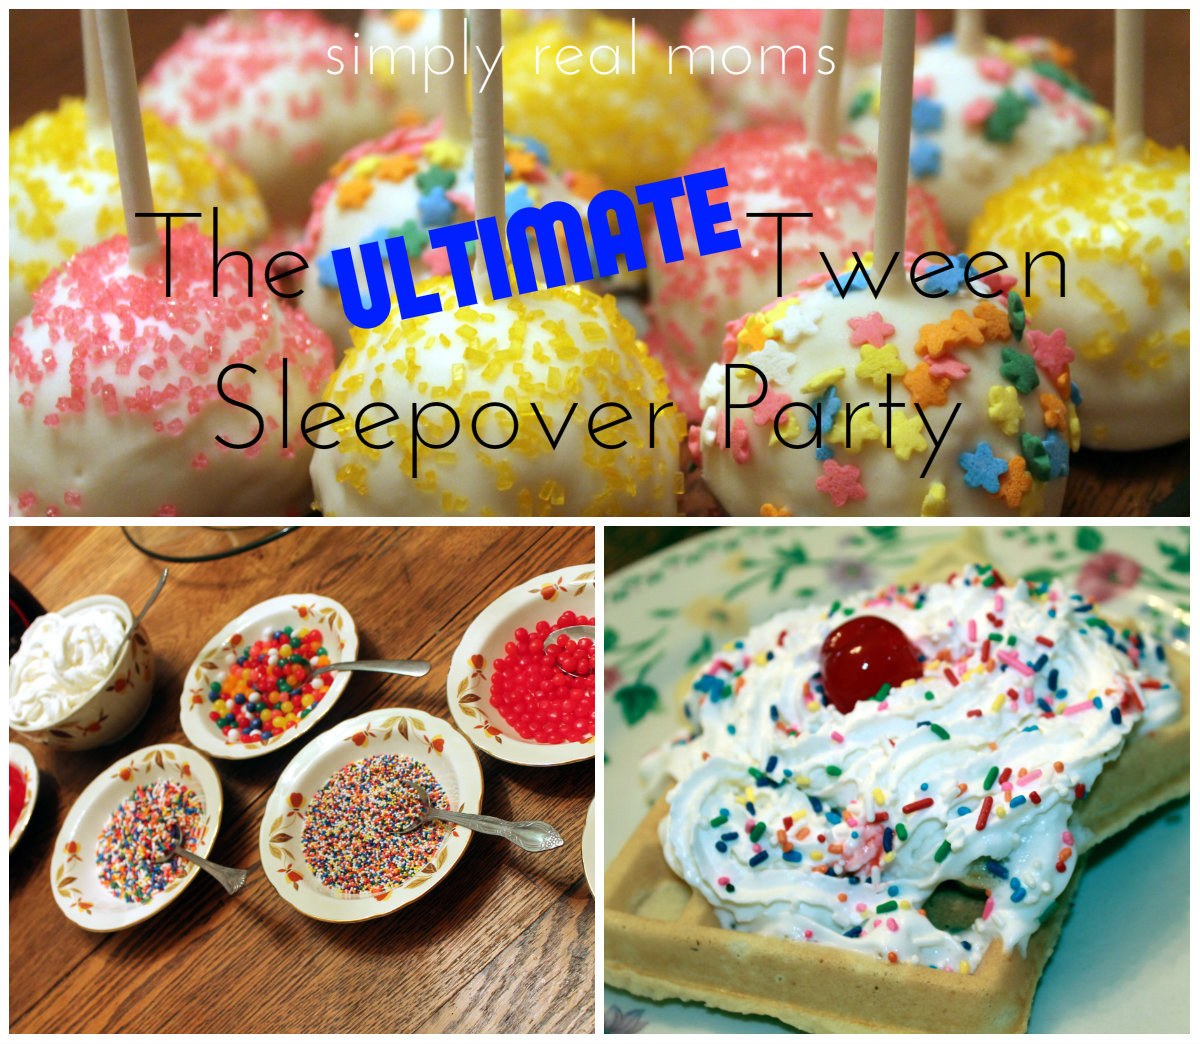 Fun Birthday Party Ideas For Tweens
 The Ultimate Tween Sleepover Party ideas Simply Real Moms